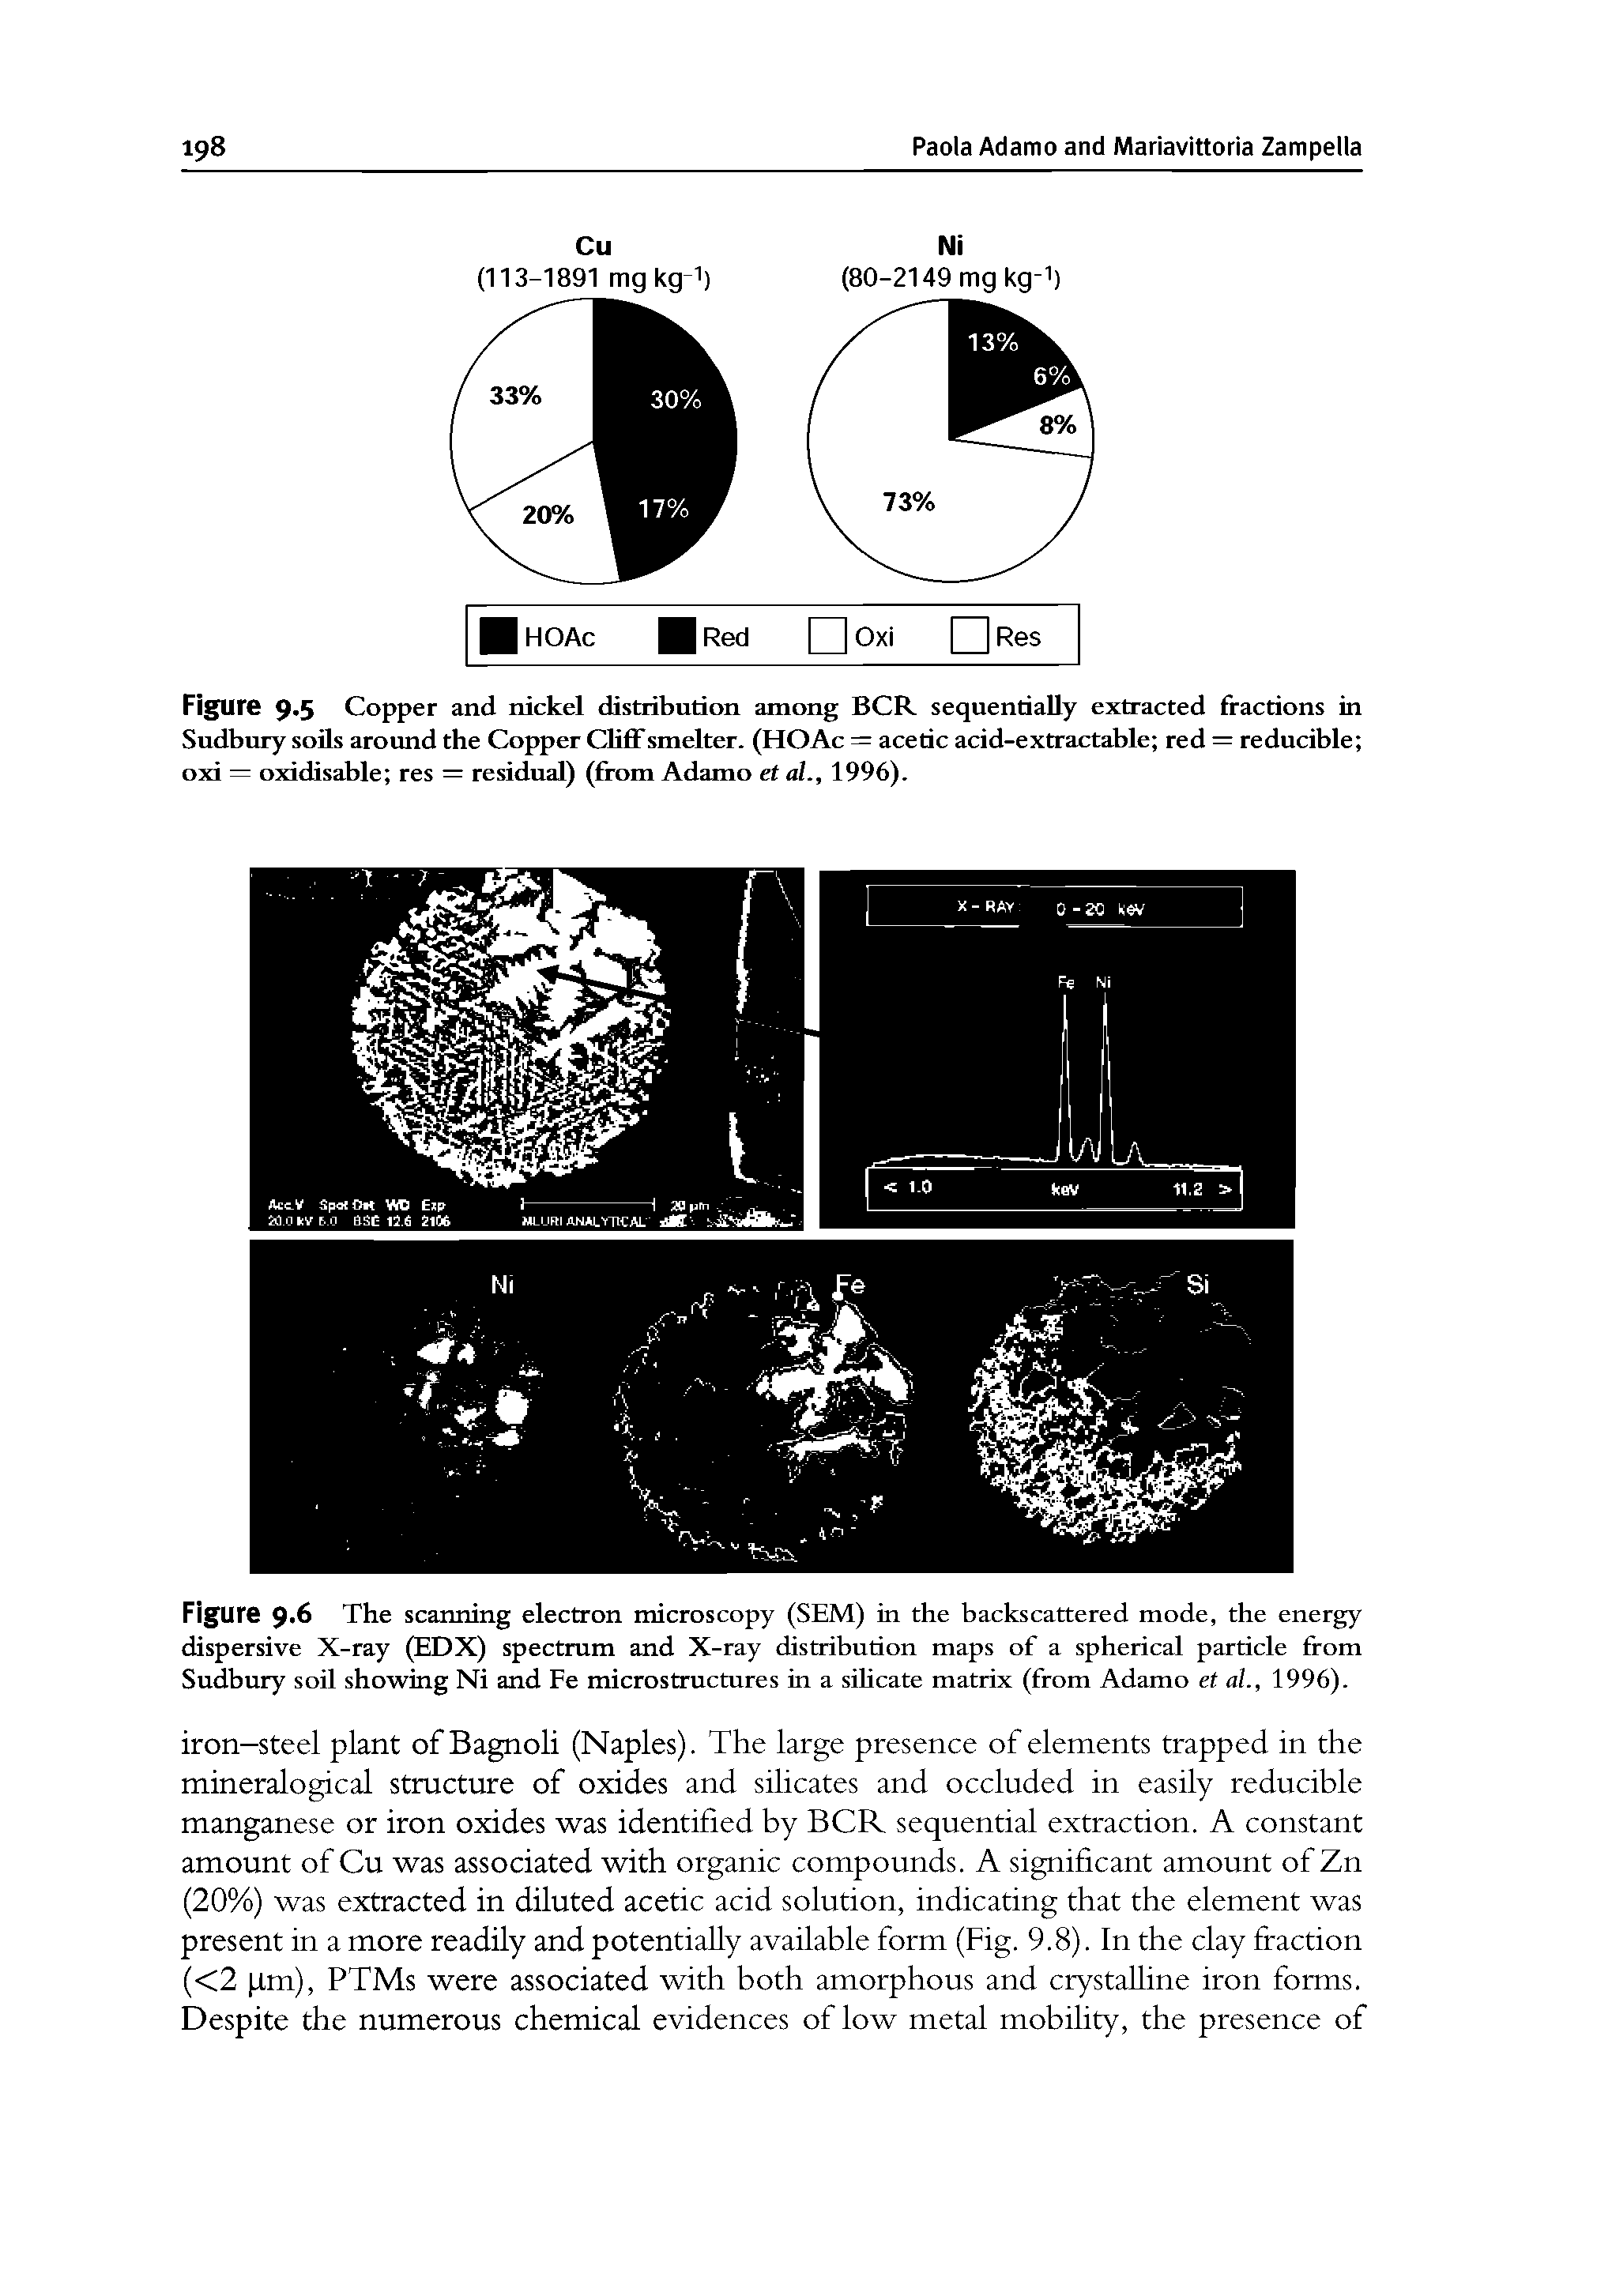 Figure 9-6 The scanning electron microscopy (SEM) in the backscattered mode, the energy dispersive X-ray (EDX) spectrum and X-ray distribution maps of a spherical particle from Sudbury soil showing Ni and Fe microstructures in a silicate matrix (from Adamo et al., 1996).